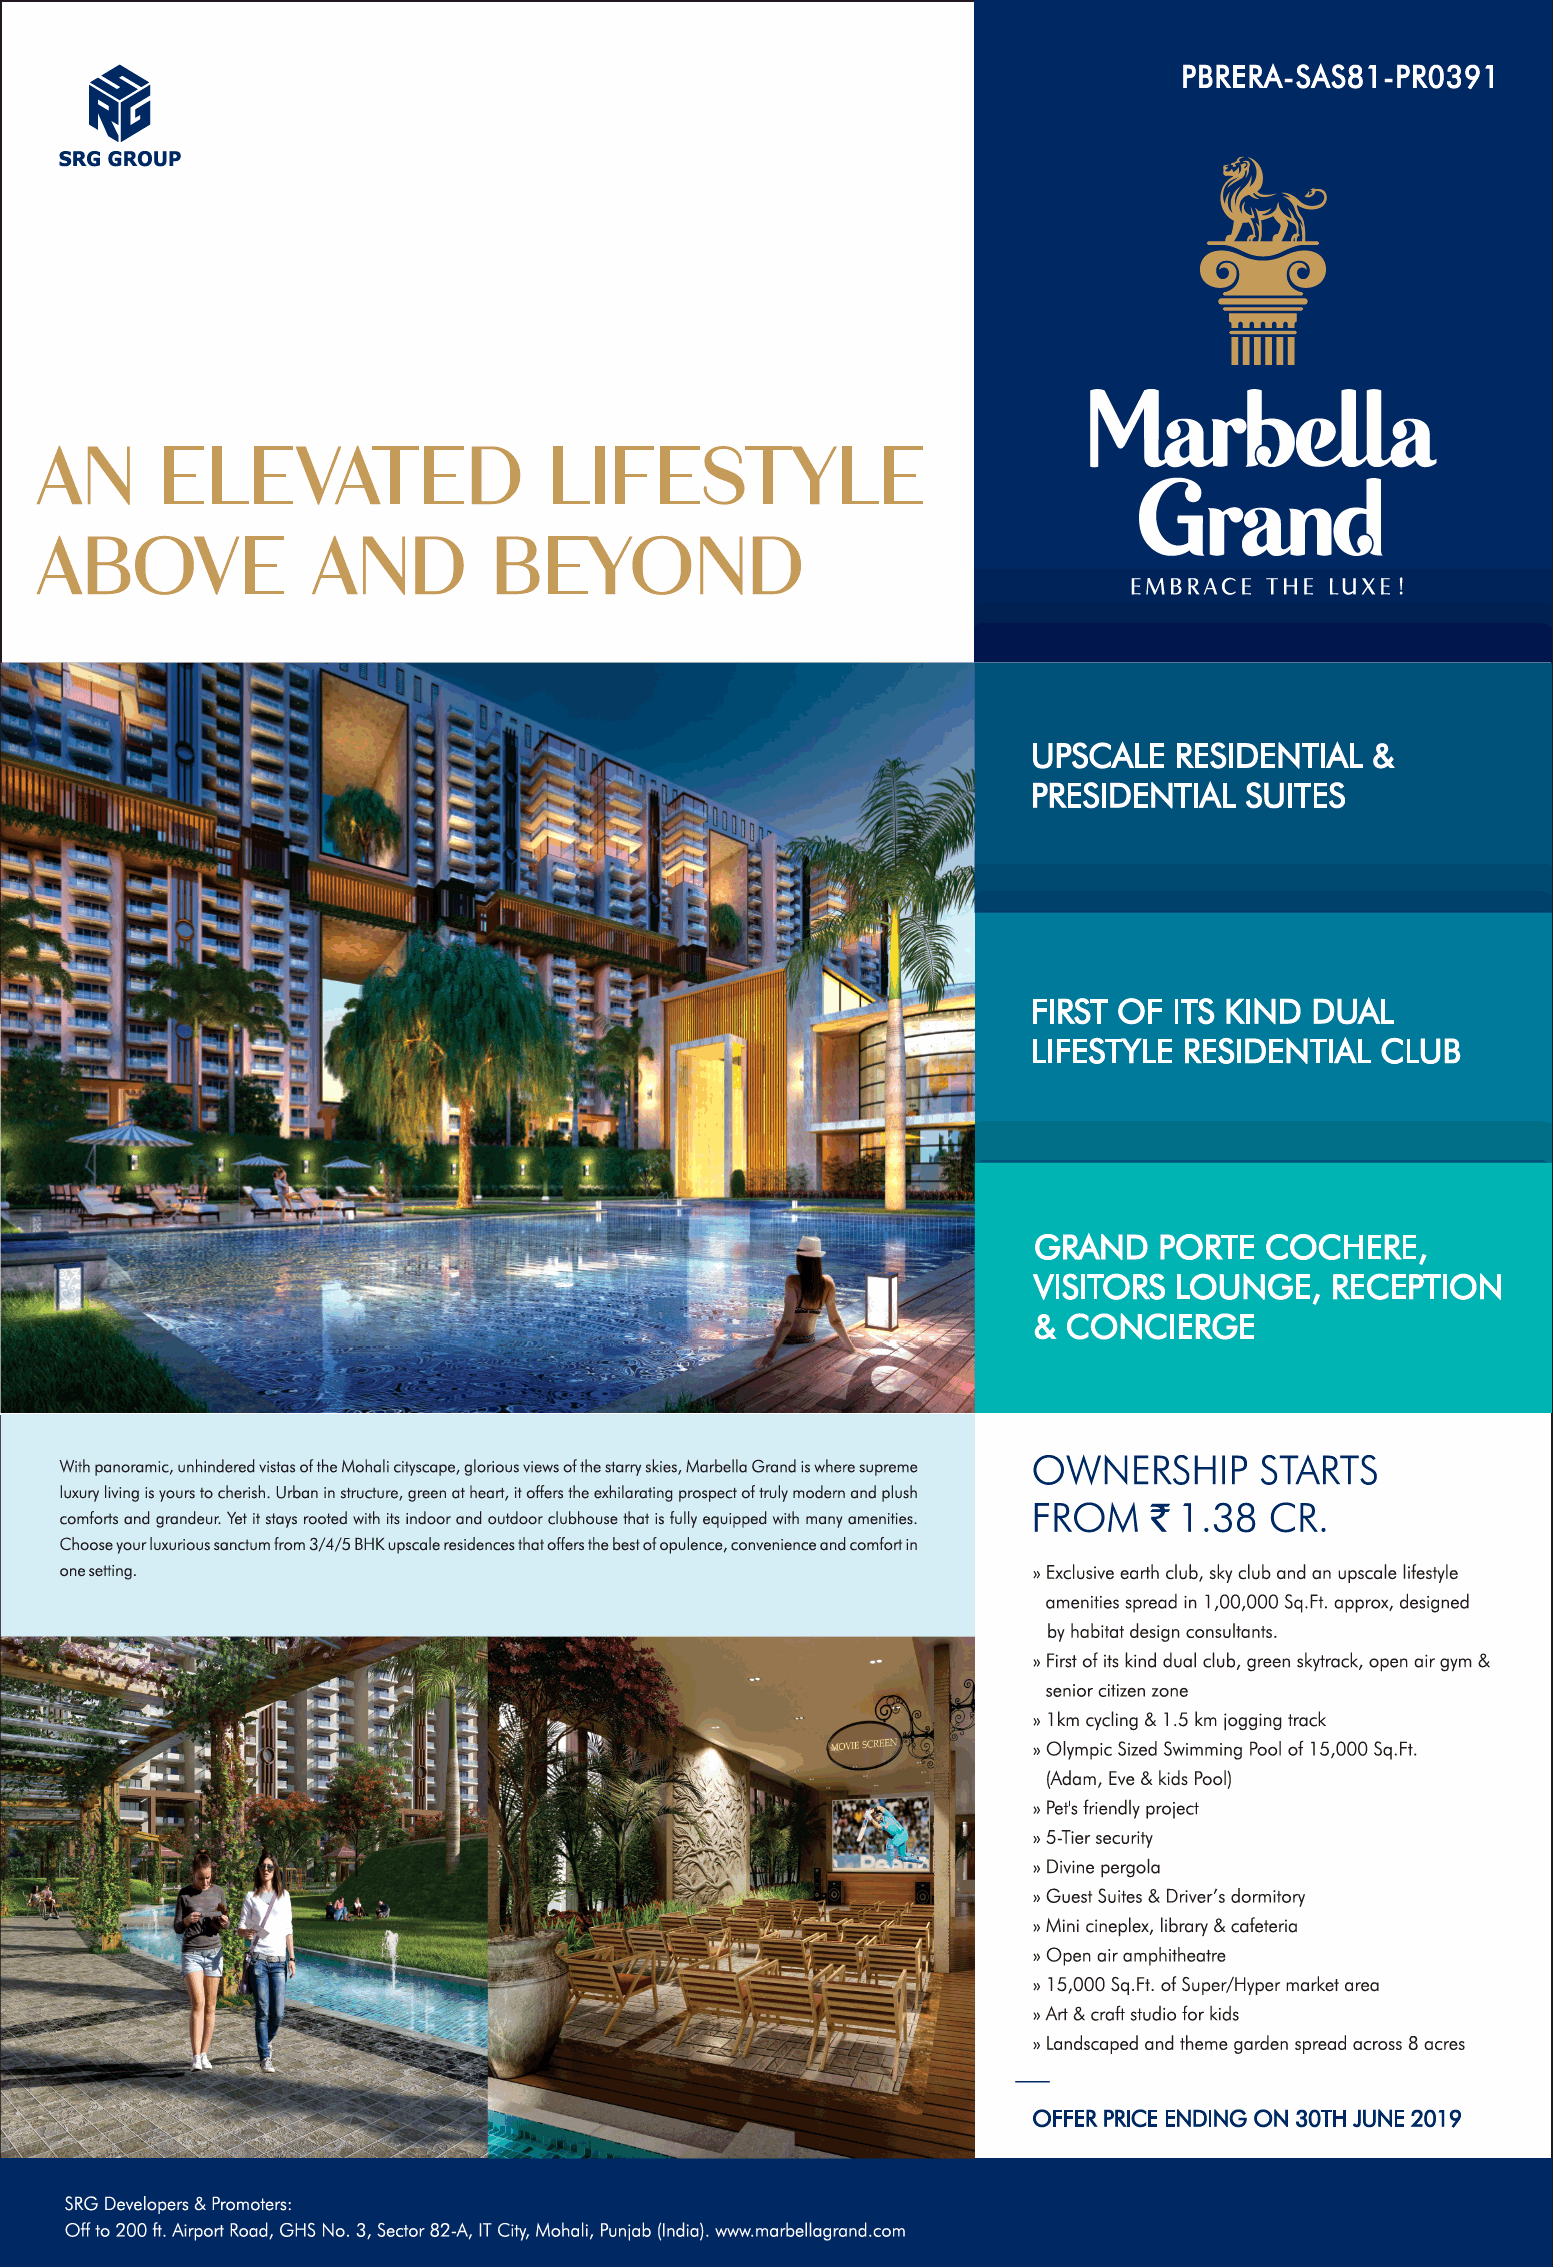 Offer price ending on 30th June 2019 at SRG Marbella Grand, Mohali Update